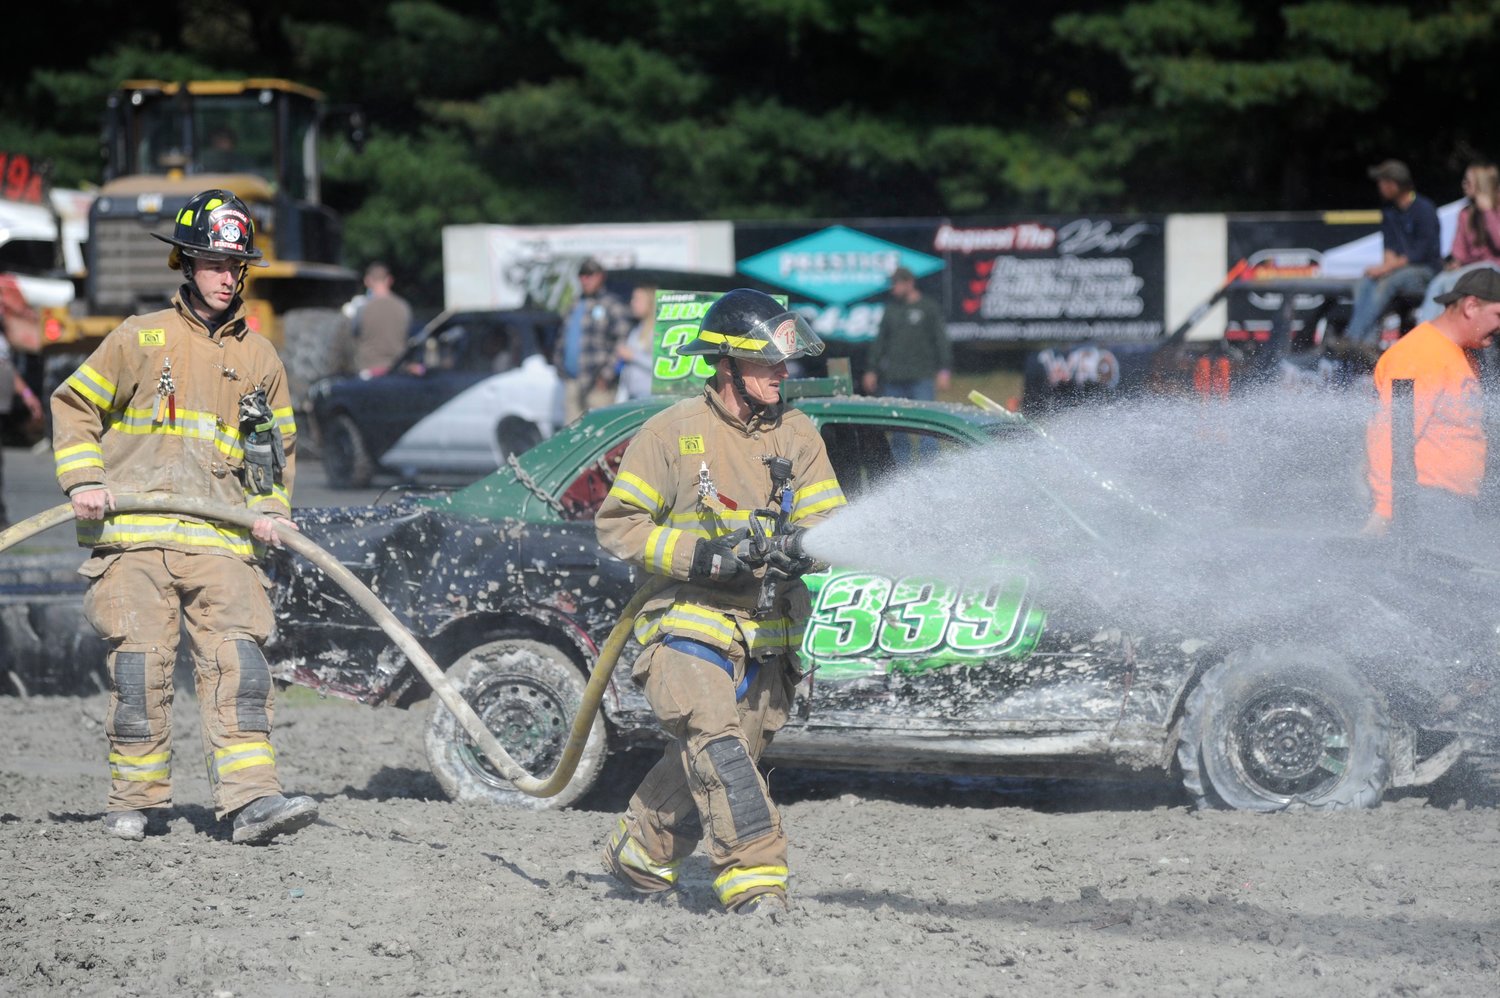 Volunteer fire departments serve their communities in more ways than responding to emergencies. Last year, several local fire departments helped out during a demolition derby at Bethel Motor Speedway by providing safety backup and wetting down the track. Pictured are members of the Kauneonga Lake Fire Department: Ryan Pennell, left, and Bill Pammer with the nozzle.